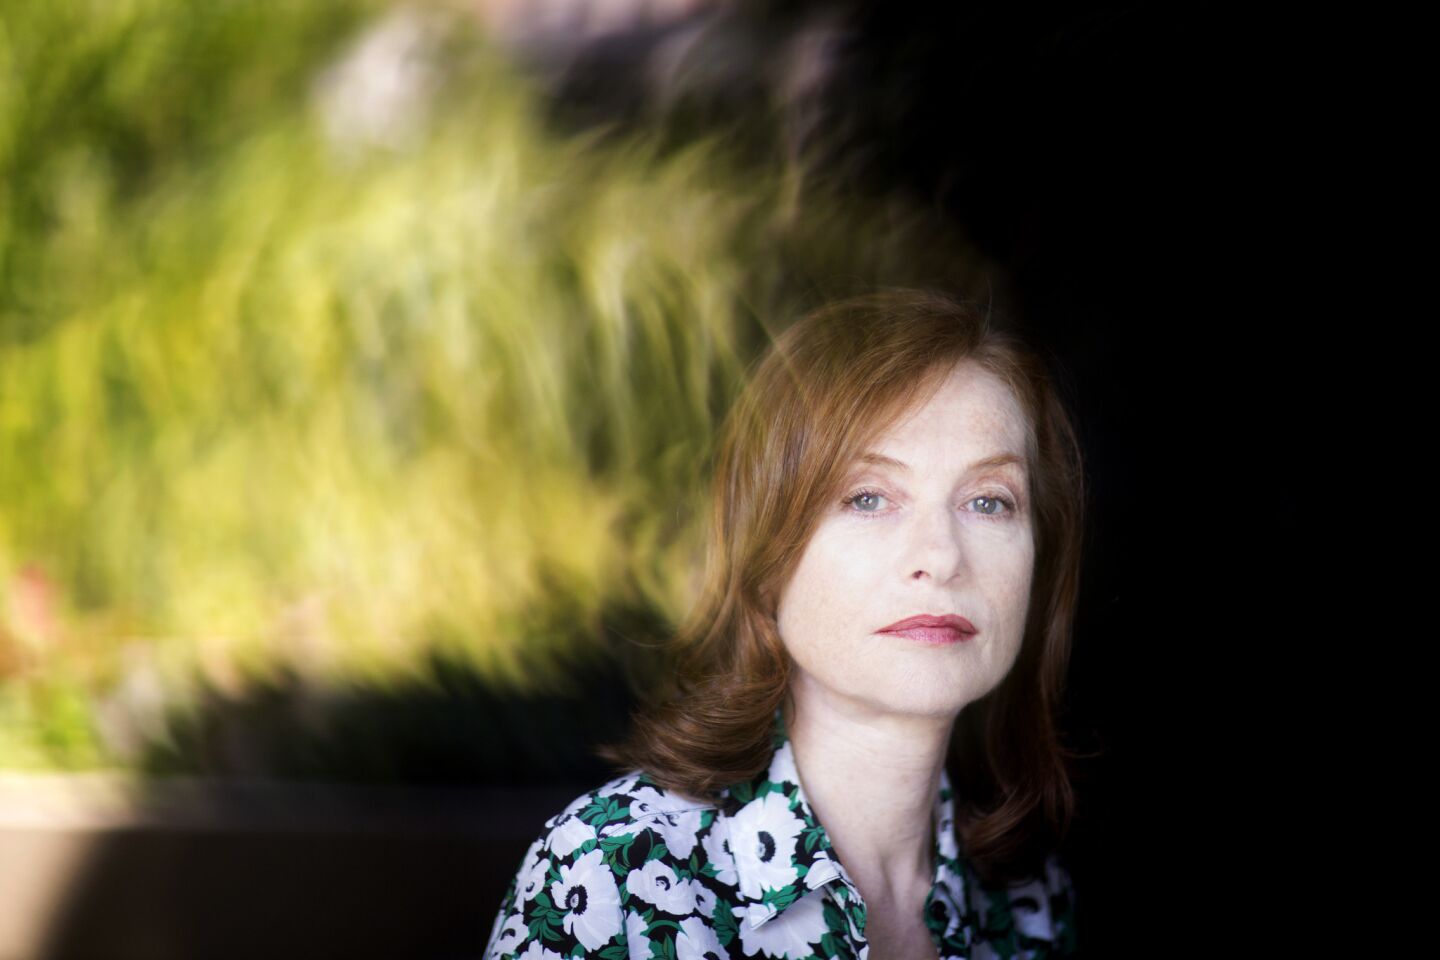 Celebrity portraits by The Times | Isabelle Huppert